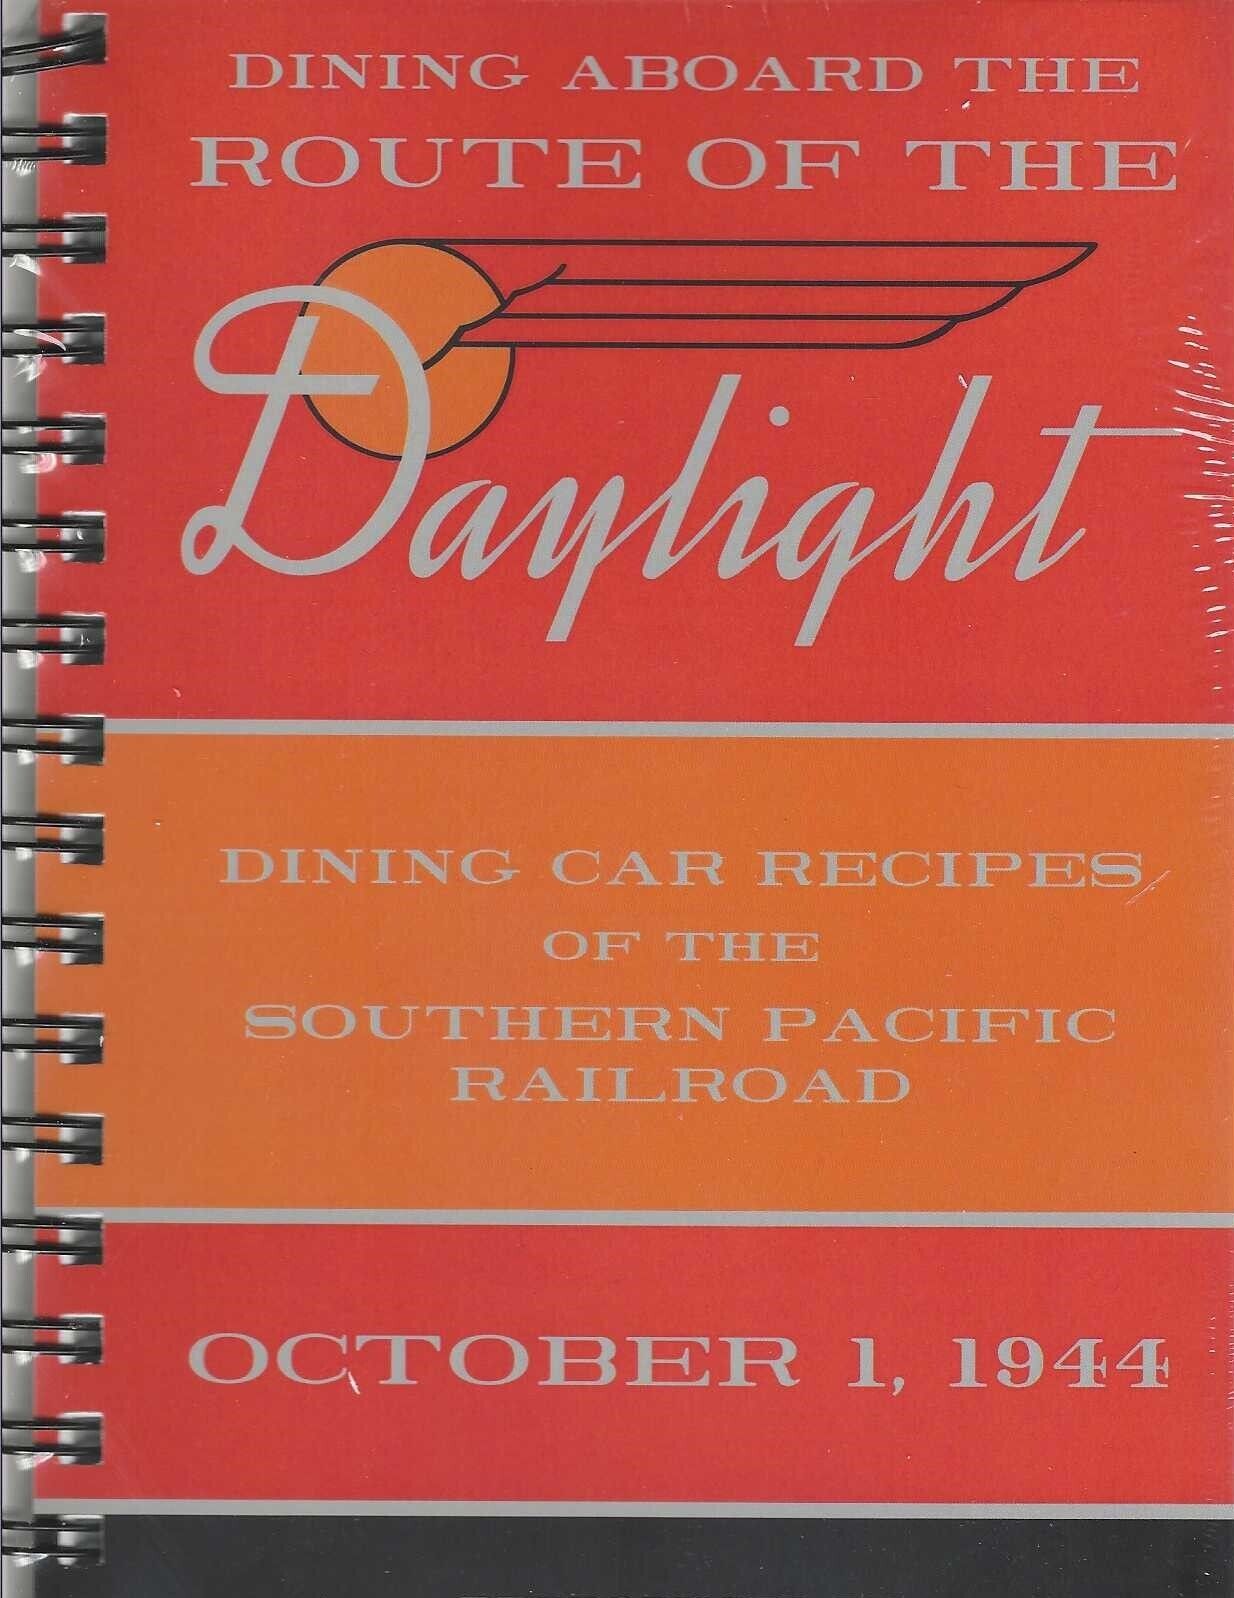 DINING Aboard the DAYLIGHT, Recipes of SOUTHERN PACIFIC - (BRAND NEW BOOK)